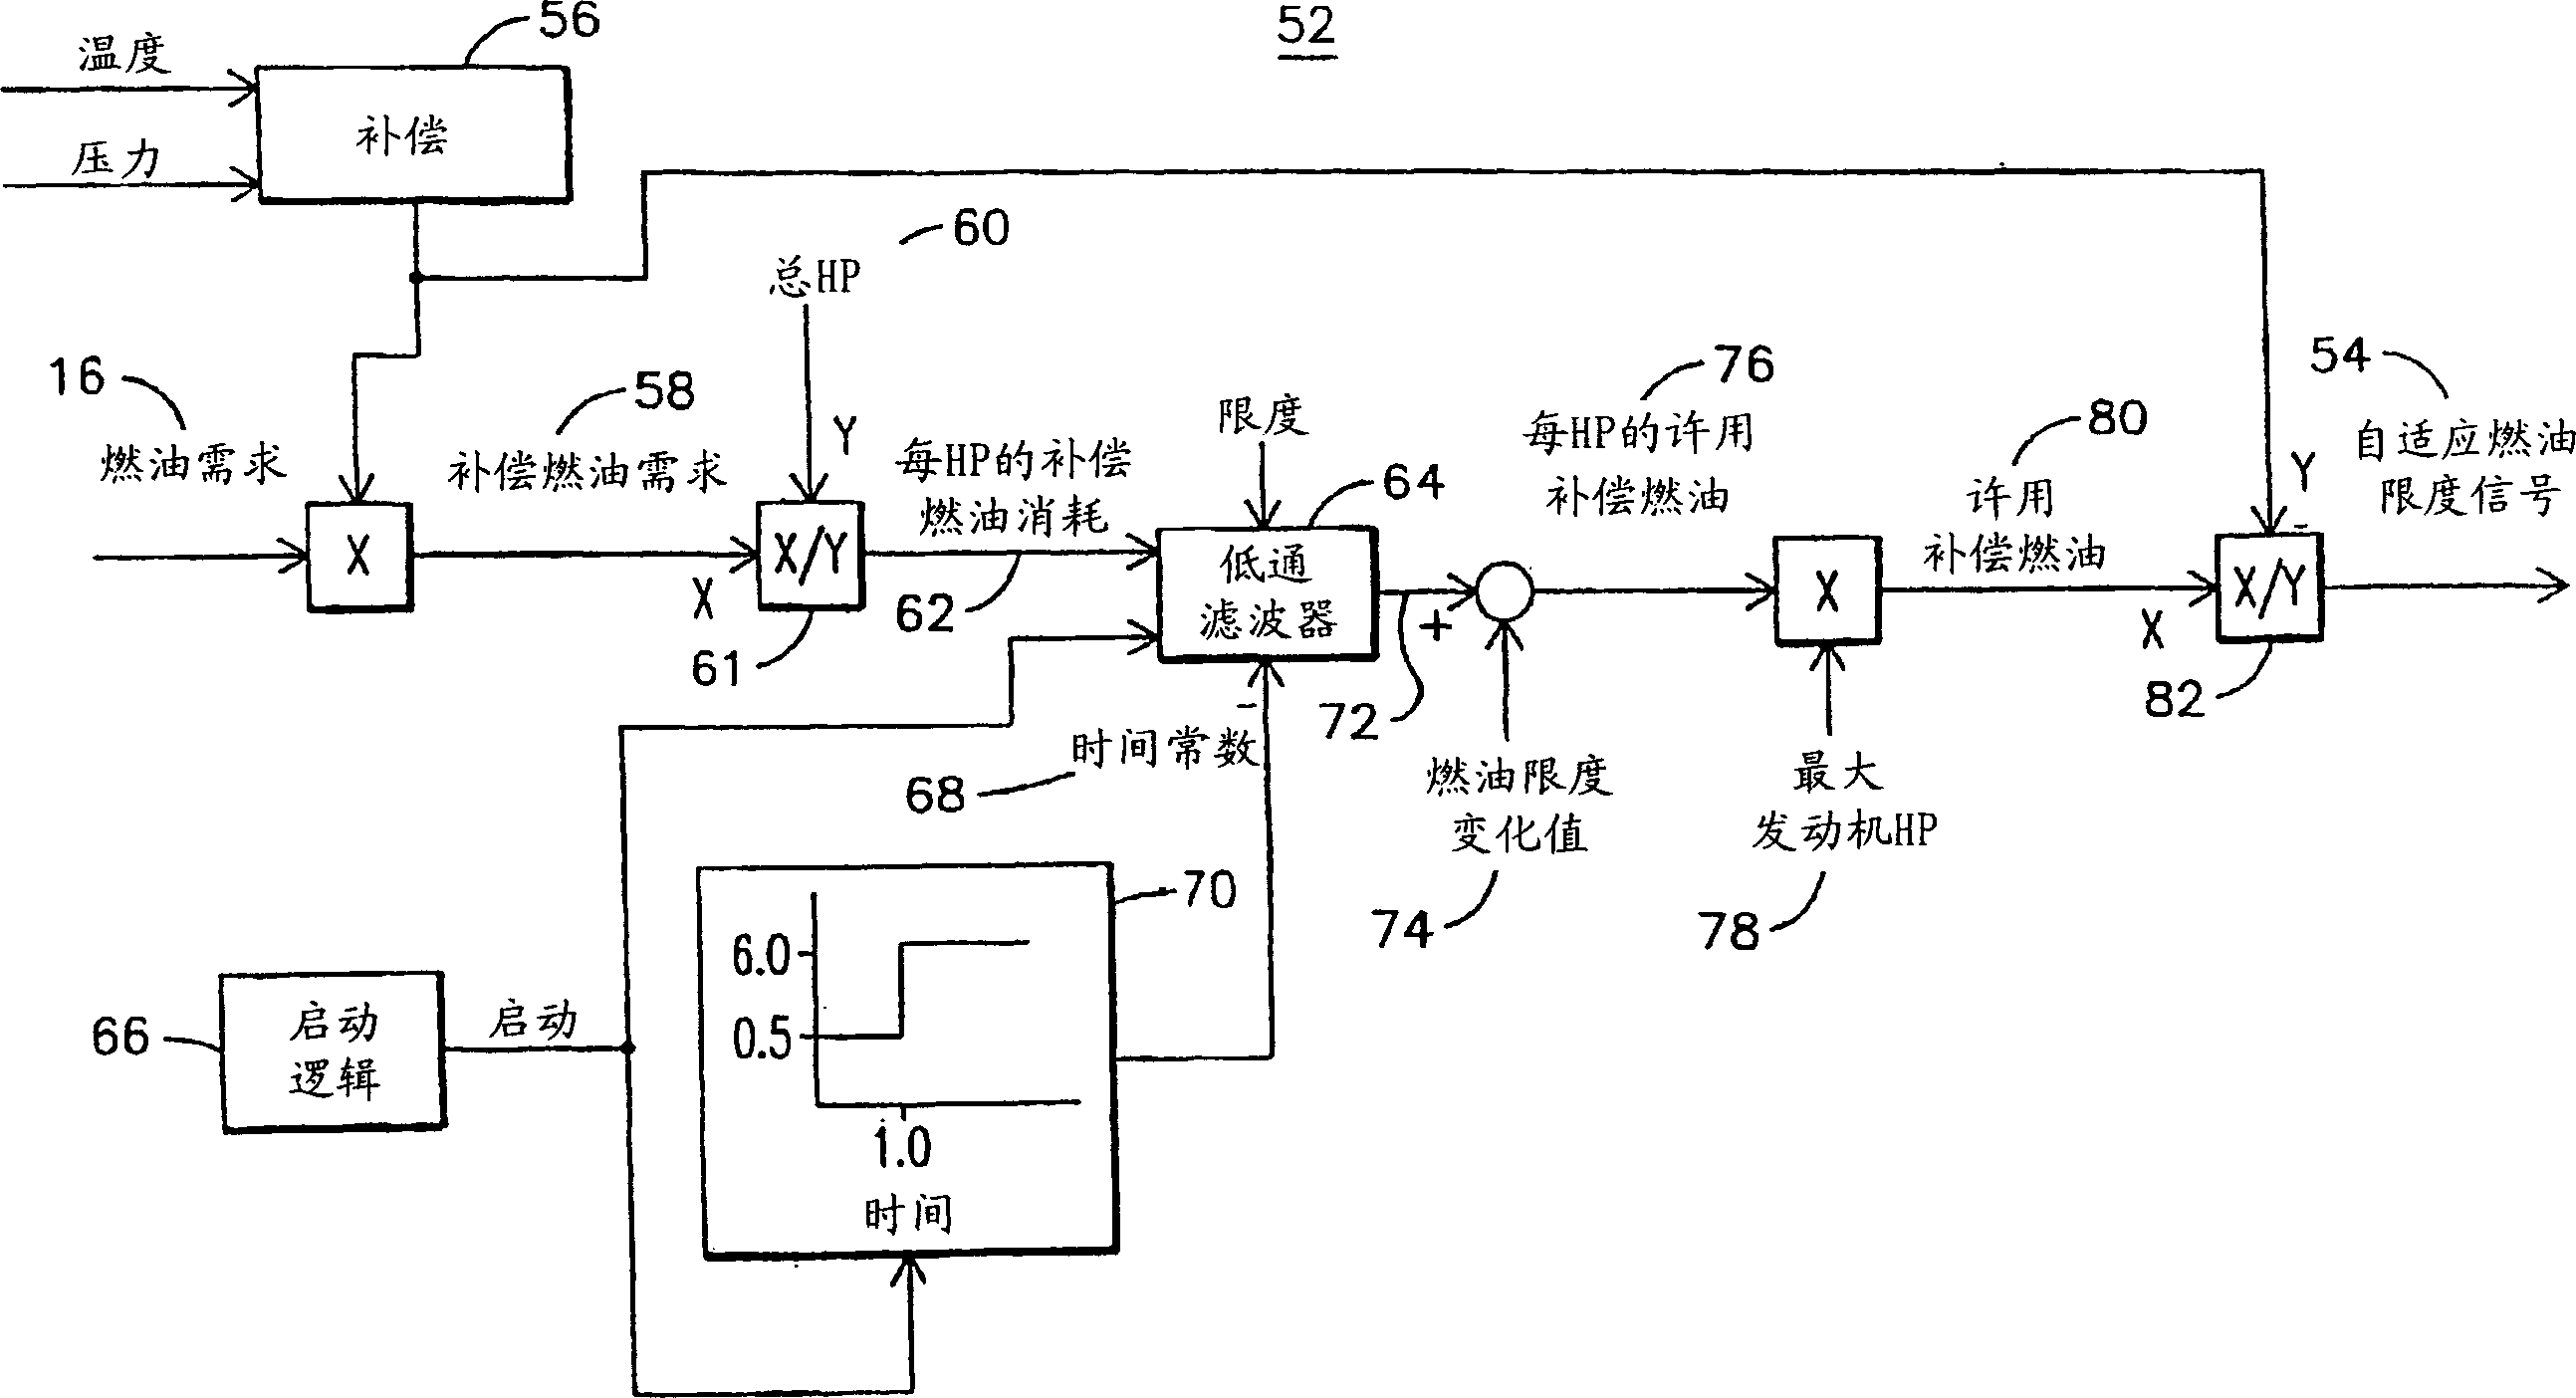 Adaptive fuel control for an internal combustion engine